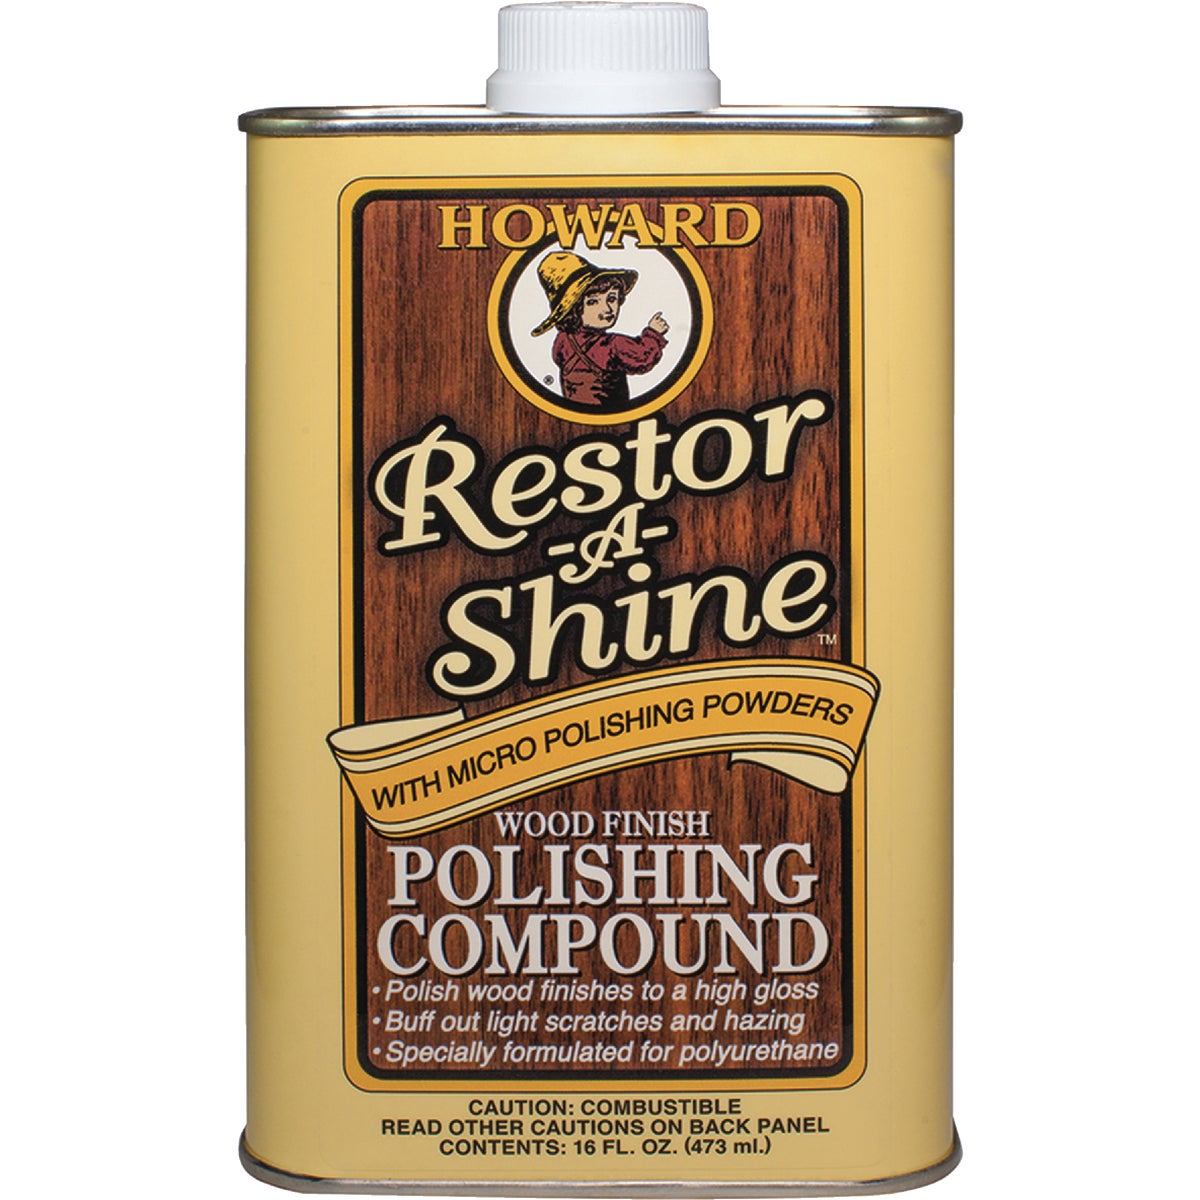 Item 791779, Specially formulated for restoring the high gloss shine to wood finishes.